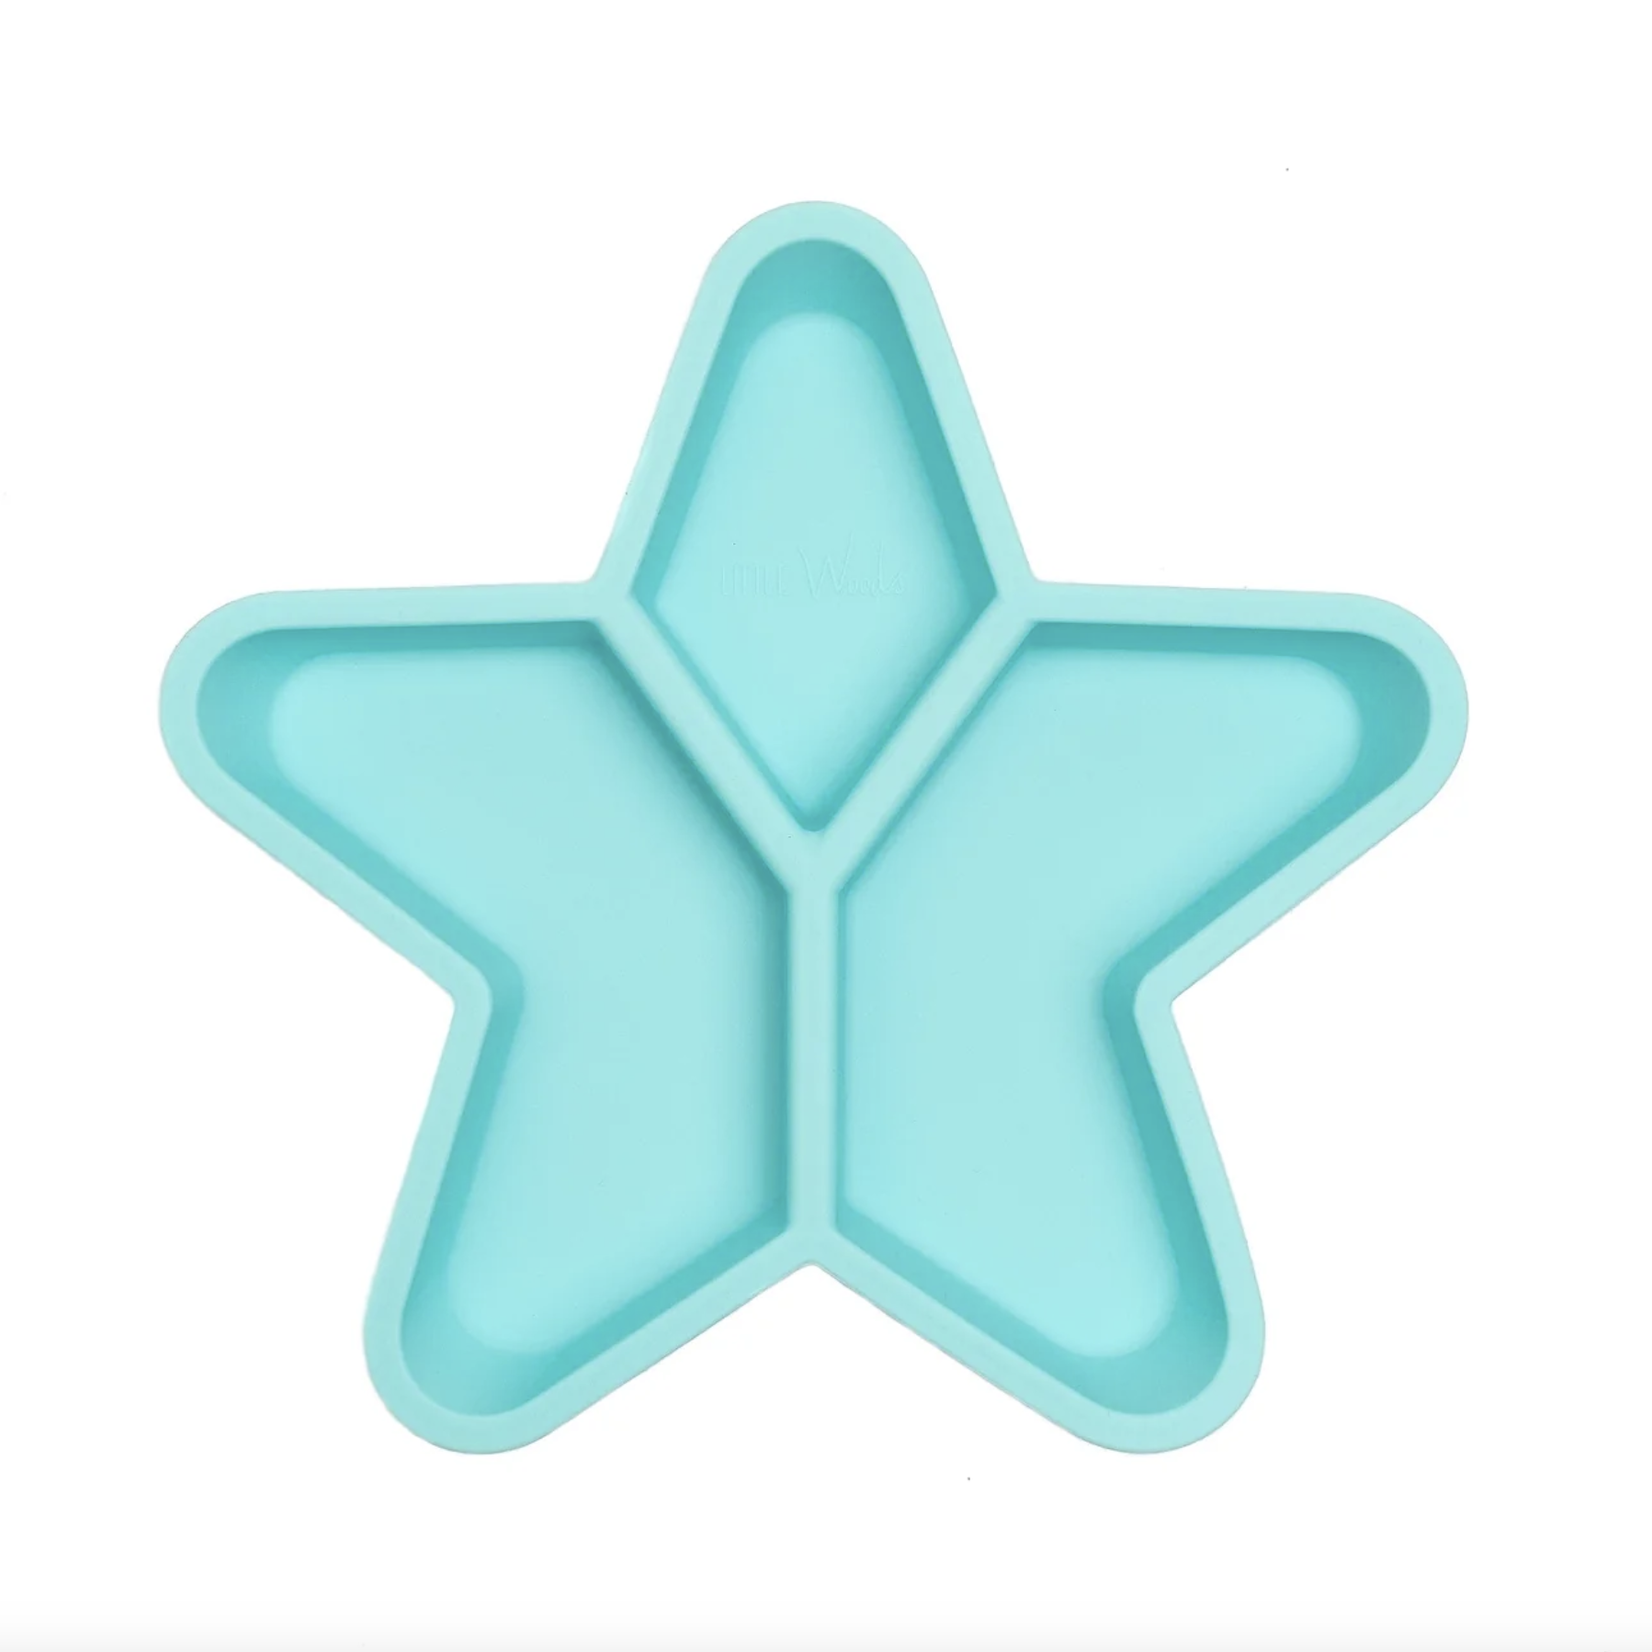 Little Woods NON-TOXIC SILICONE DIVIDED STAR PLATE Duck egg blue